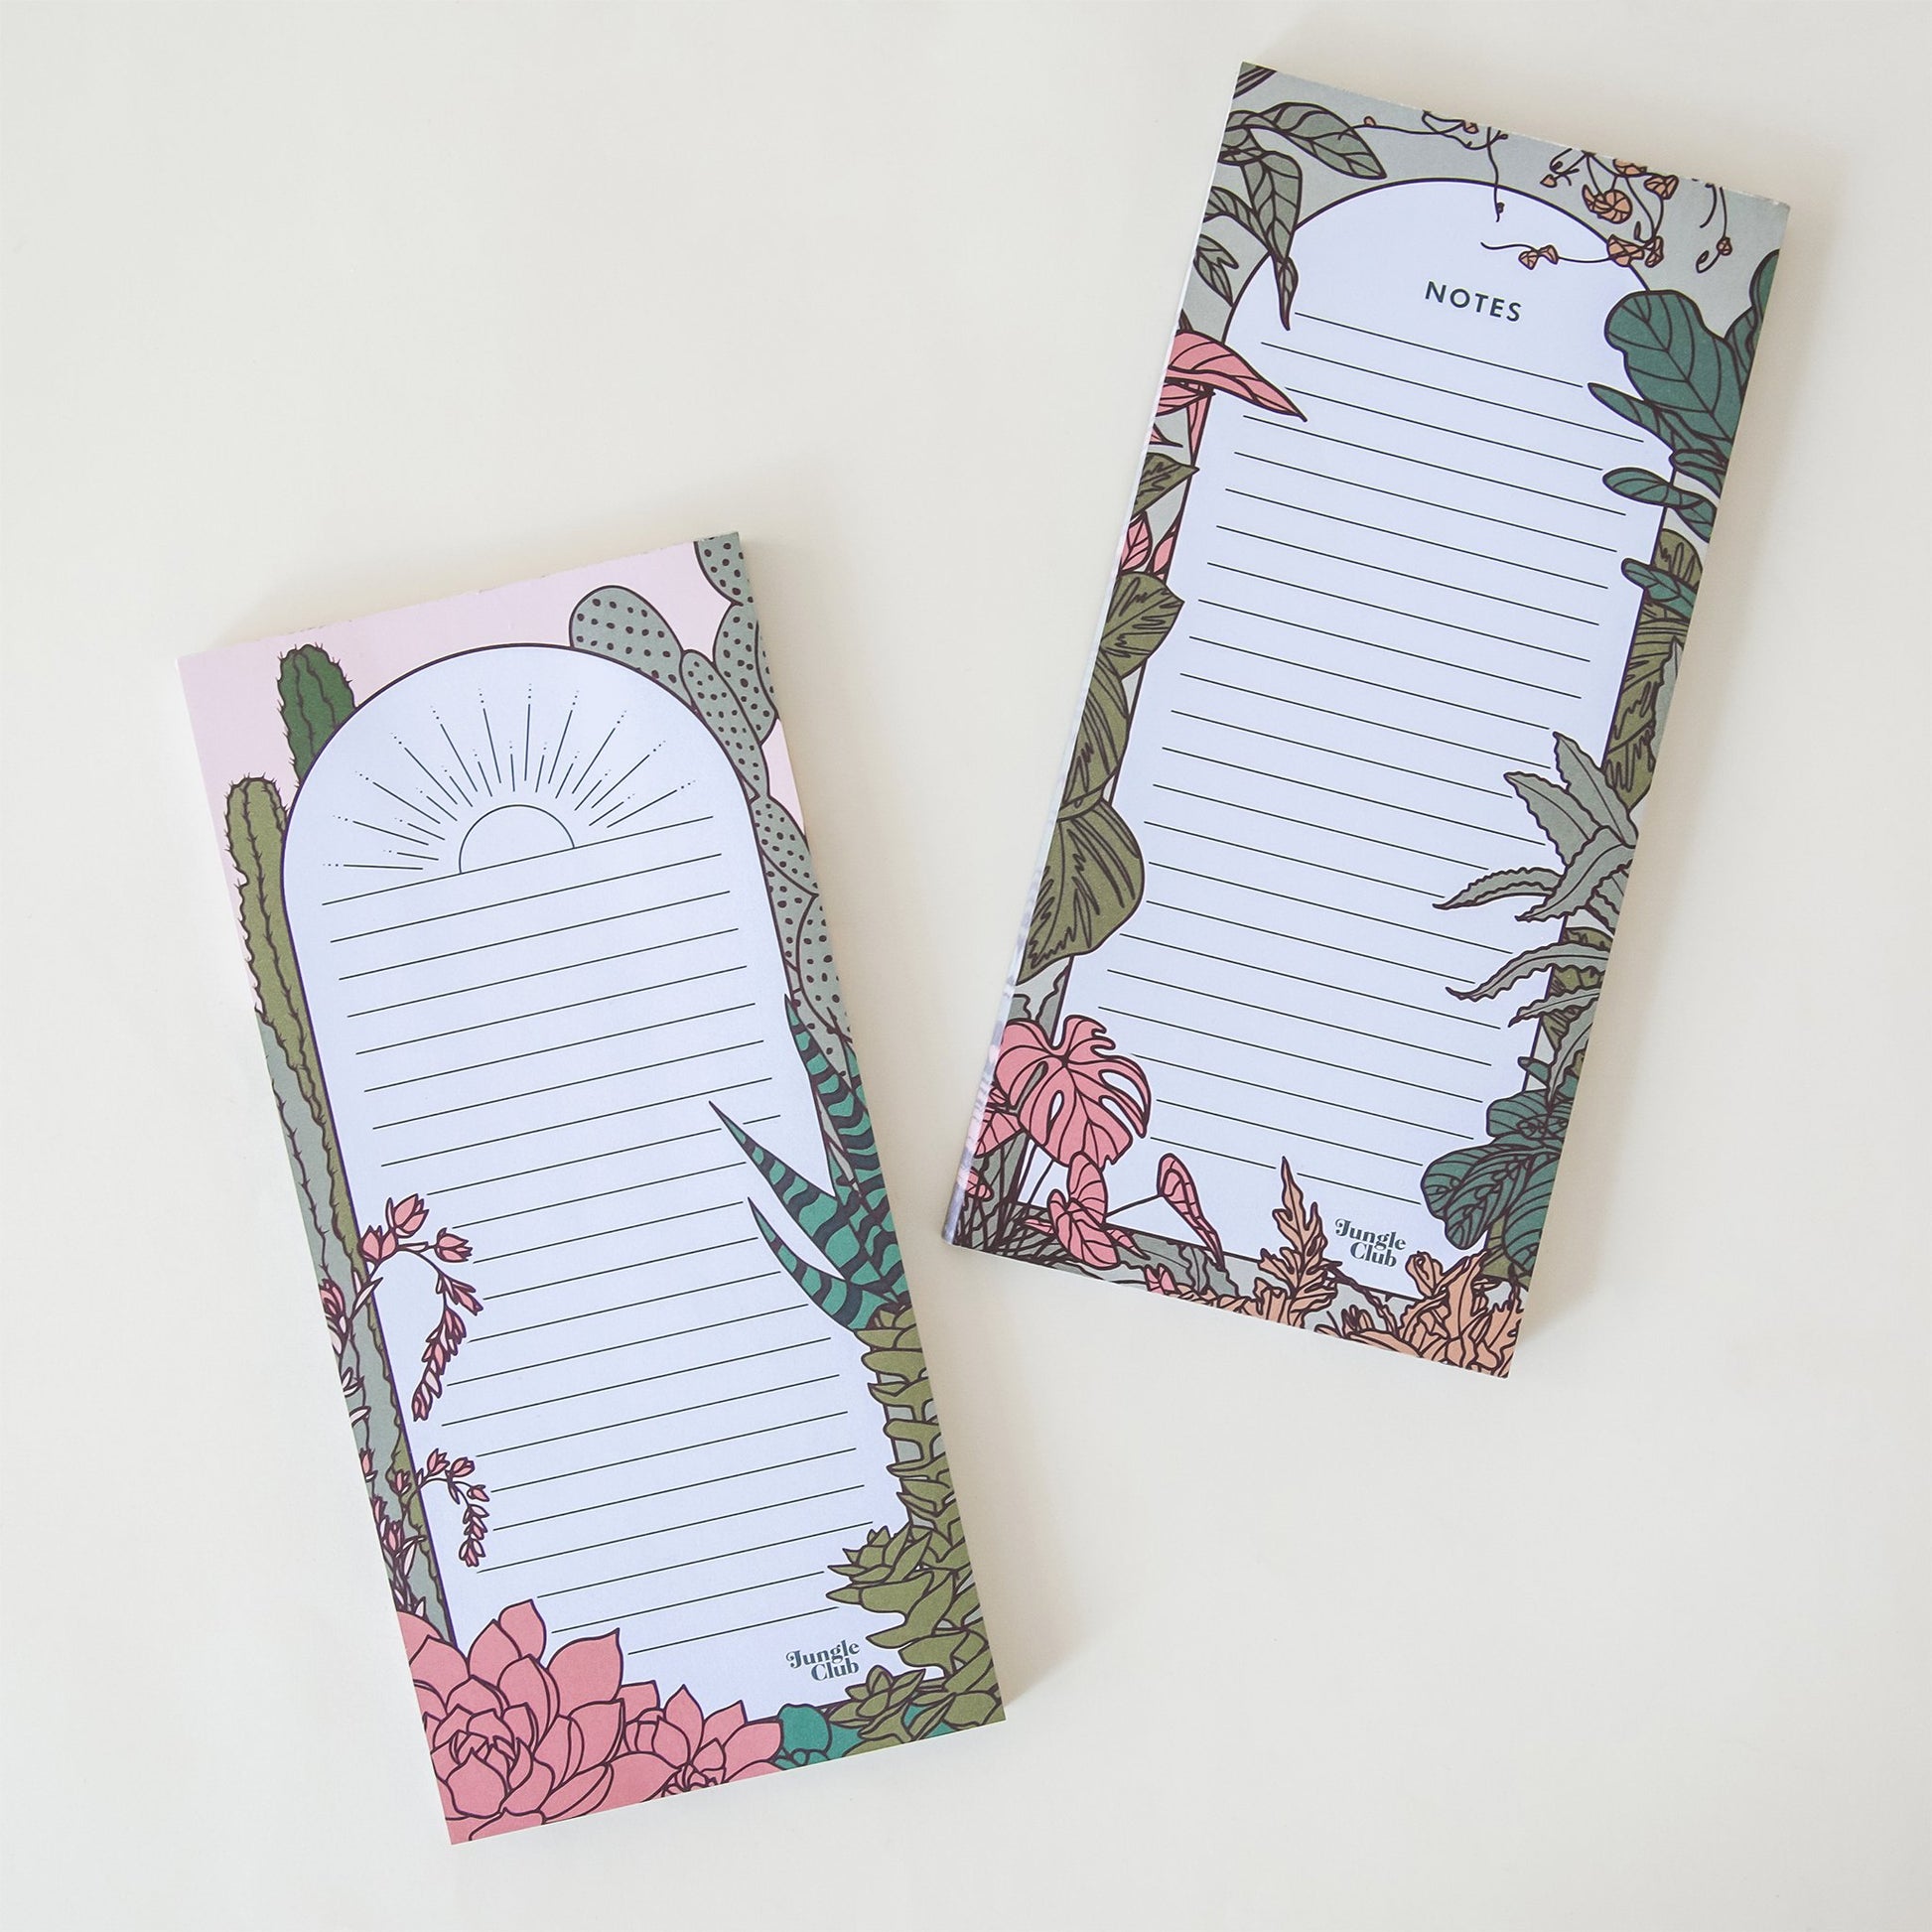 Two rectangular notepads filled with horizontal lines and outlined in a deep green borders, accented by an array of natural, soft toned succulent plants. The notepad to the left features a simple sunset horizon print and the other is titled 'Notes' above.